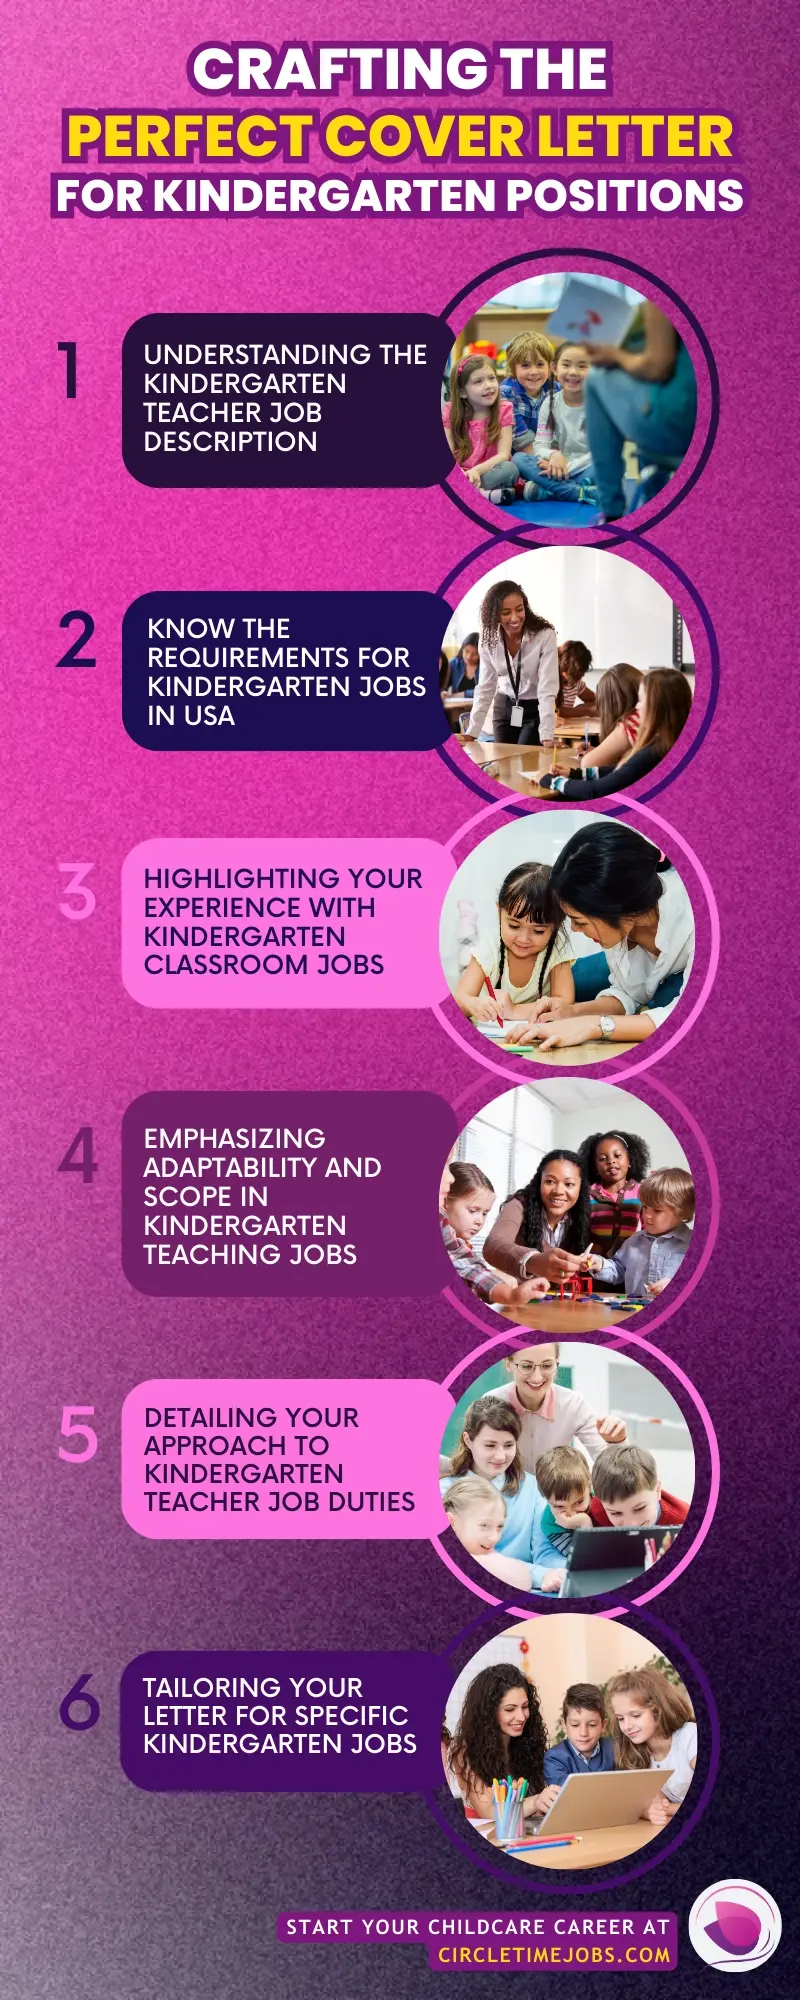 CTJ Infographics Crafting the Perfect Cover Letter for Kindergarten Positions copy